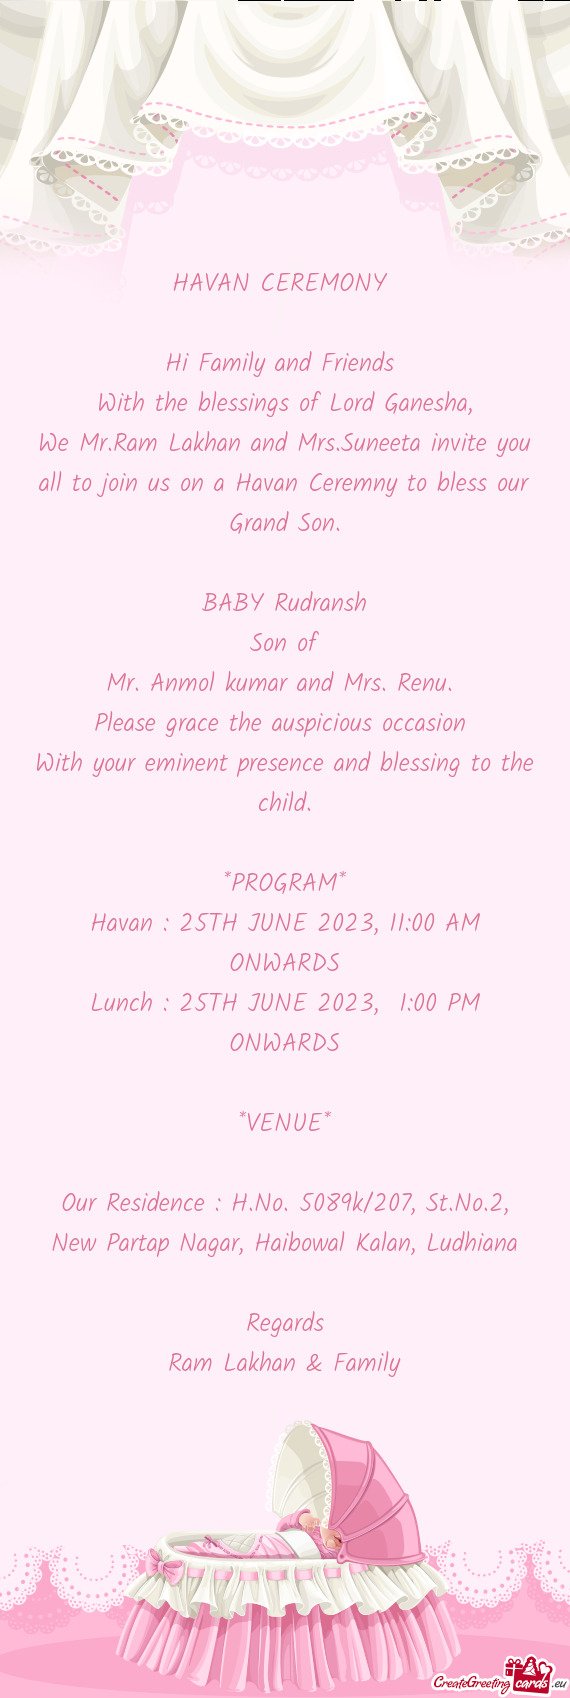 We Mr.Ram Lakhan and Mrs.Suneeta invite you all to join us on a Havan Ceremny to bless our Grand Son